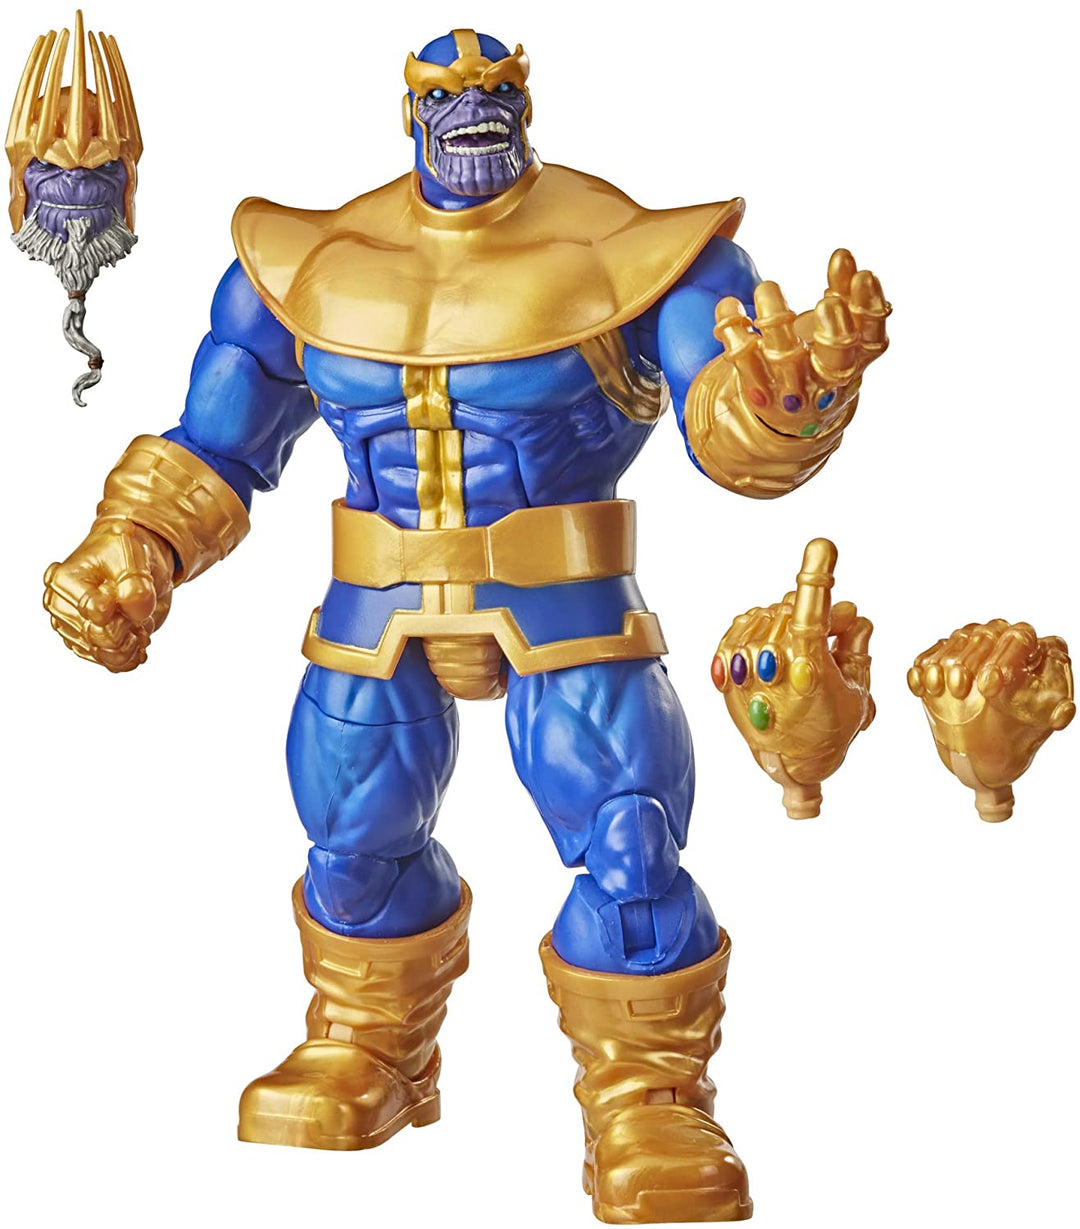 Hasbro Marvel Legends Series 6-inch Collectible Action Figure Thanos Toy, Premium Design and 3 Accessories, F0220